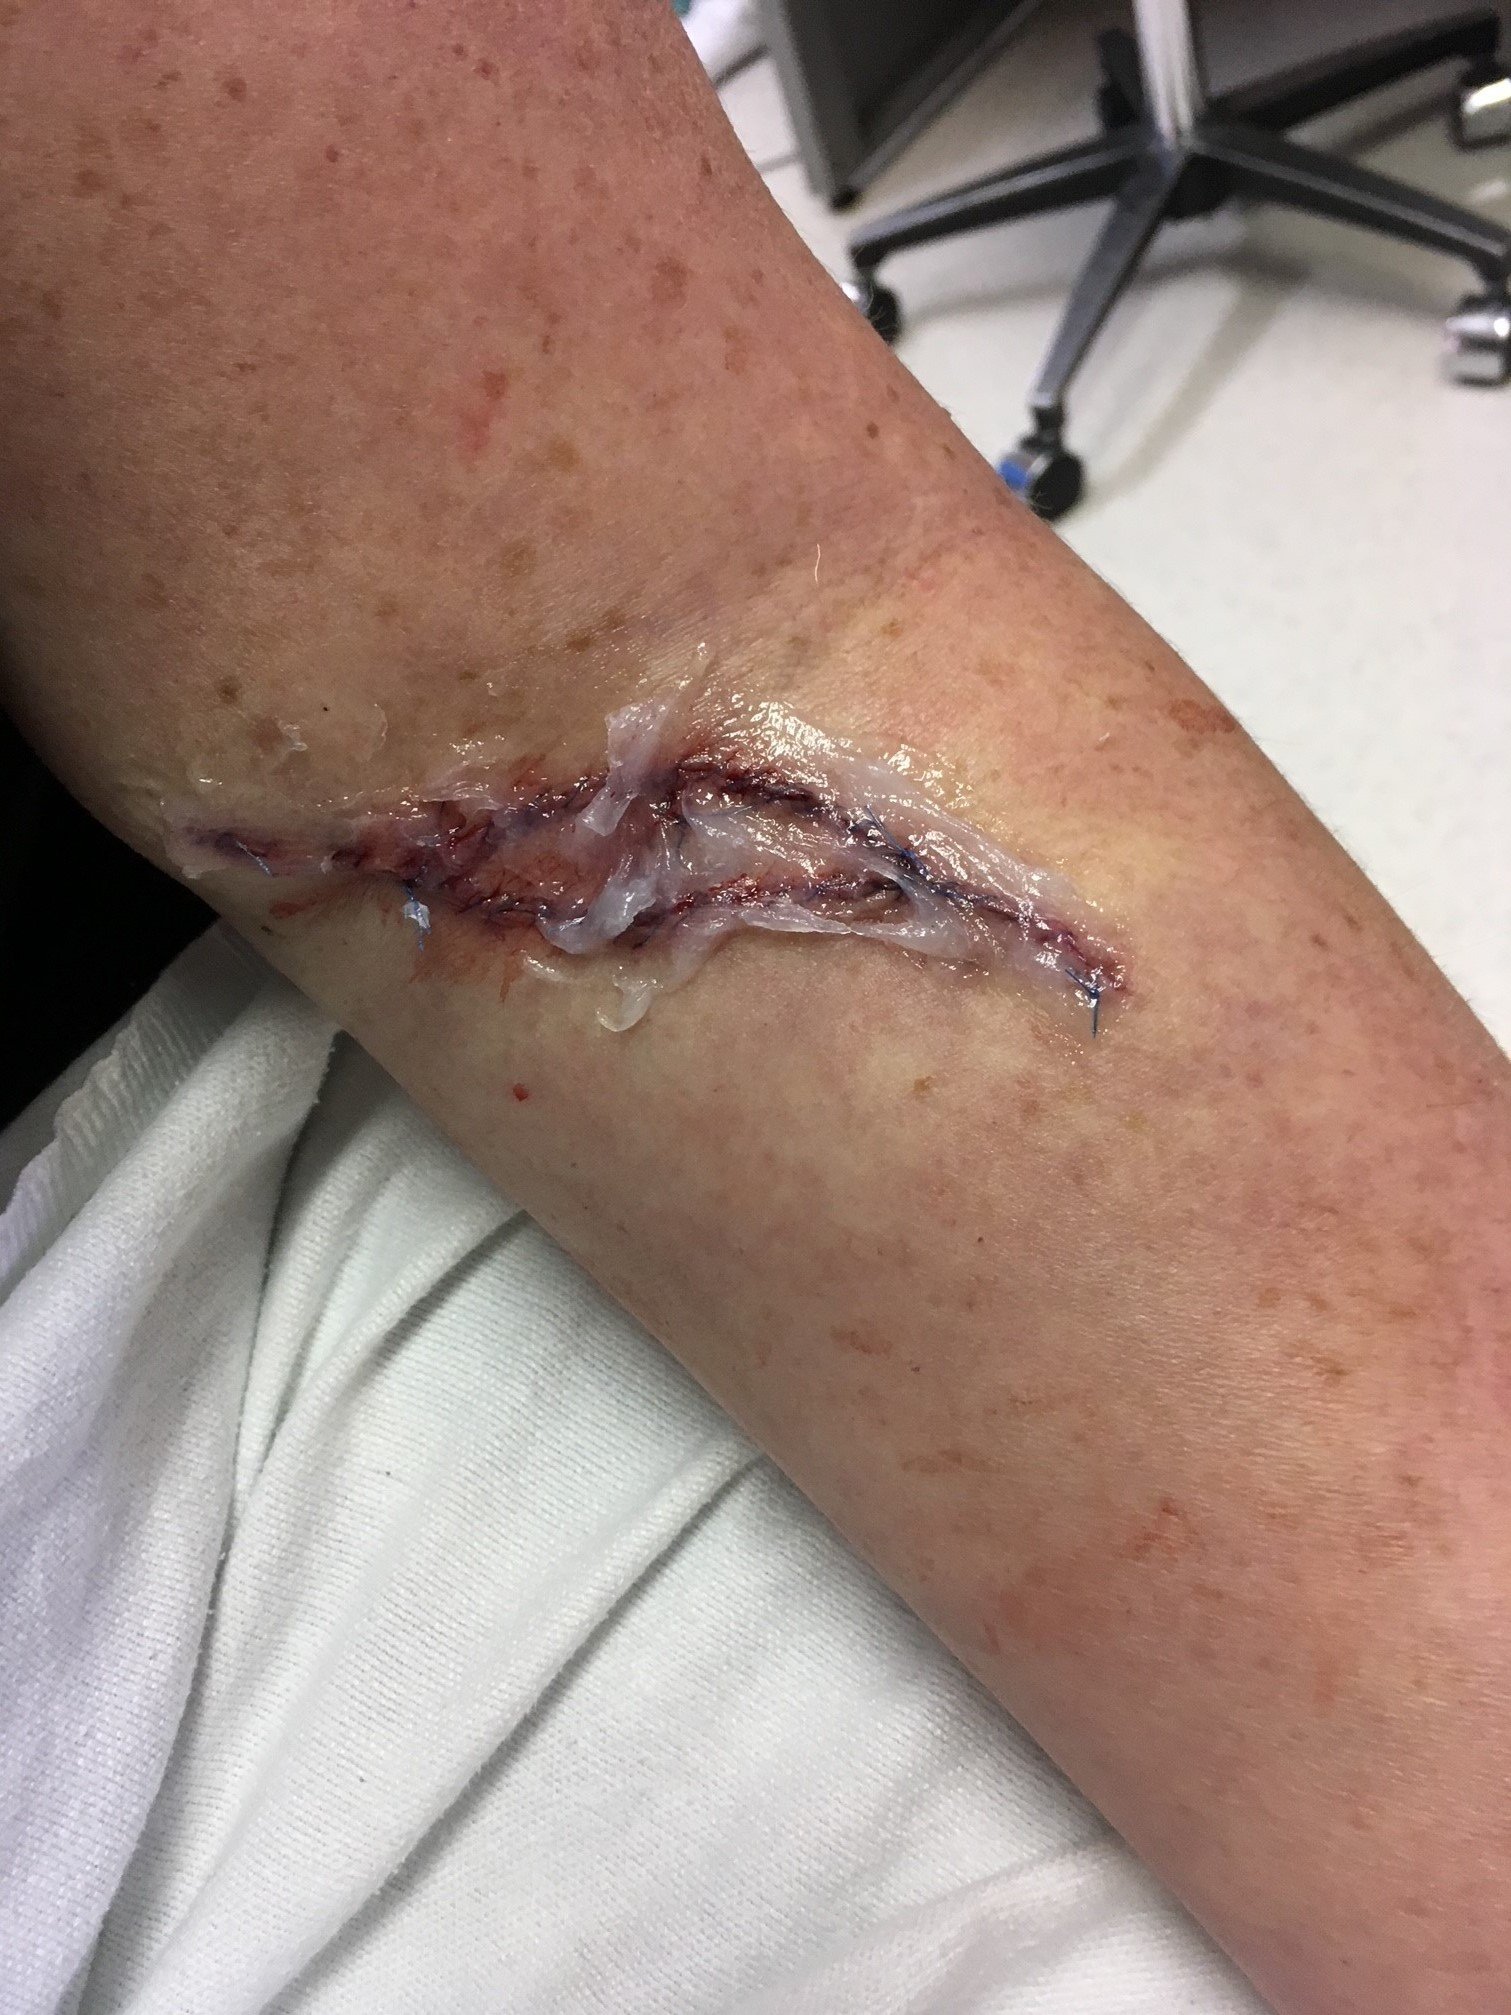 Since her first diagnosis, Ellerbe has had numerous cancerous and pre-cancerous spots removed, including one on her arm. The cancer on her arm was so deep that she has nerve damage from the removal, and is no longer able to get blood drawn from that arm.